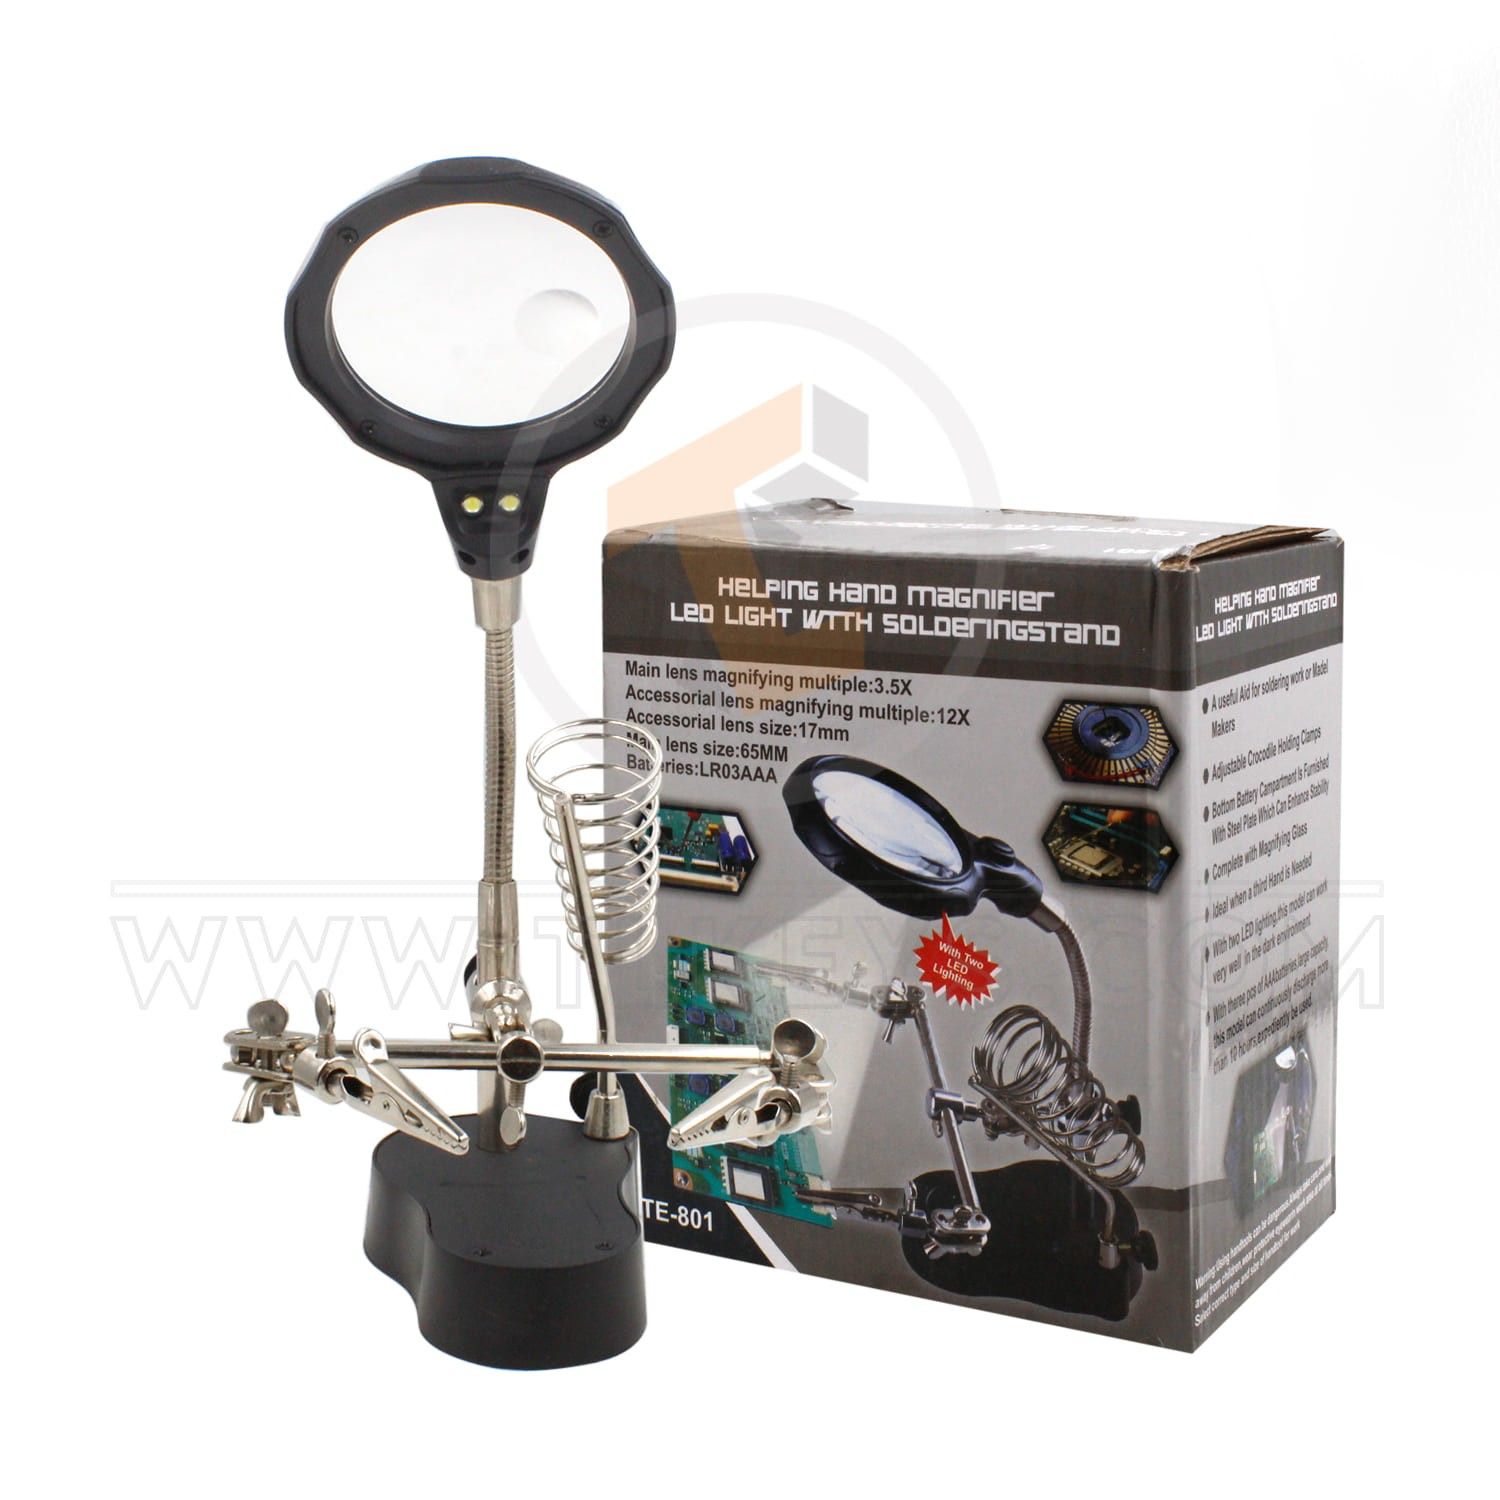 TE-801 Multi-function LED Magnifier accessories tools